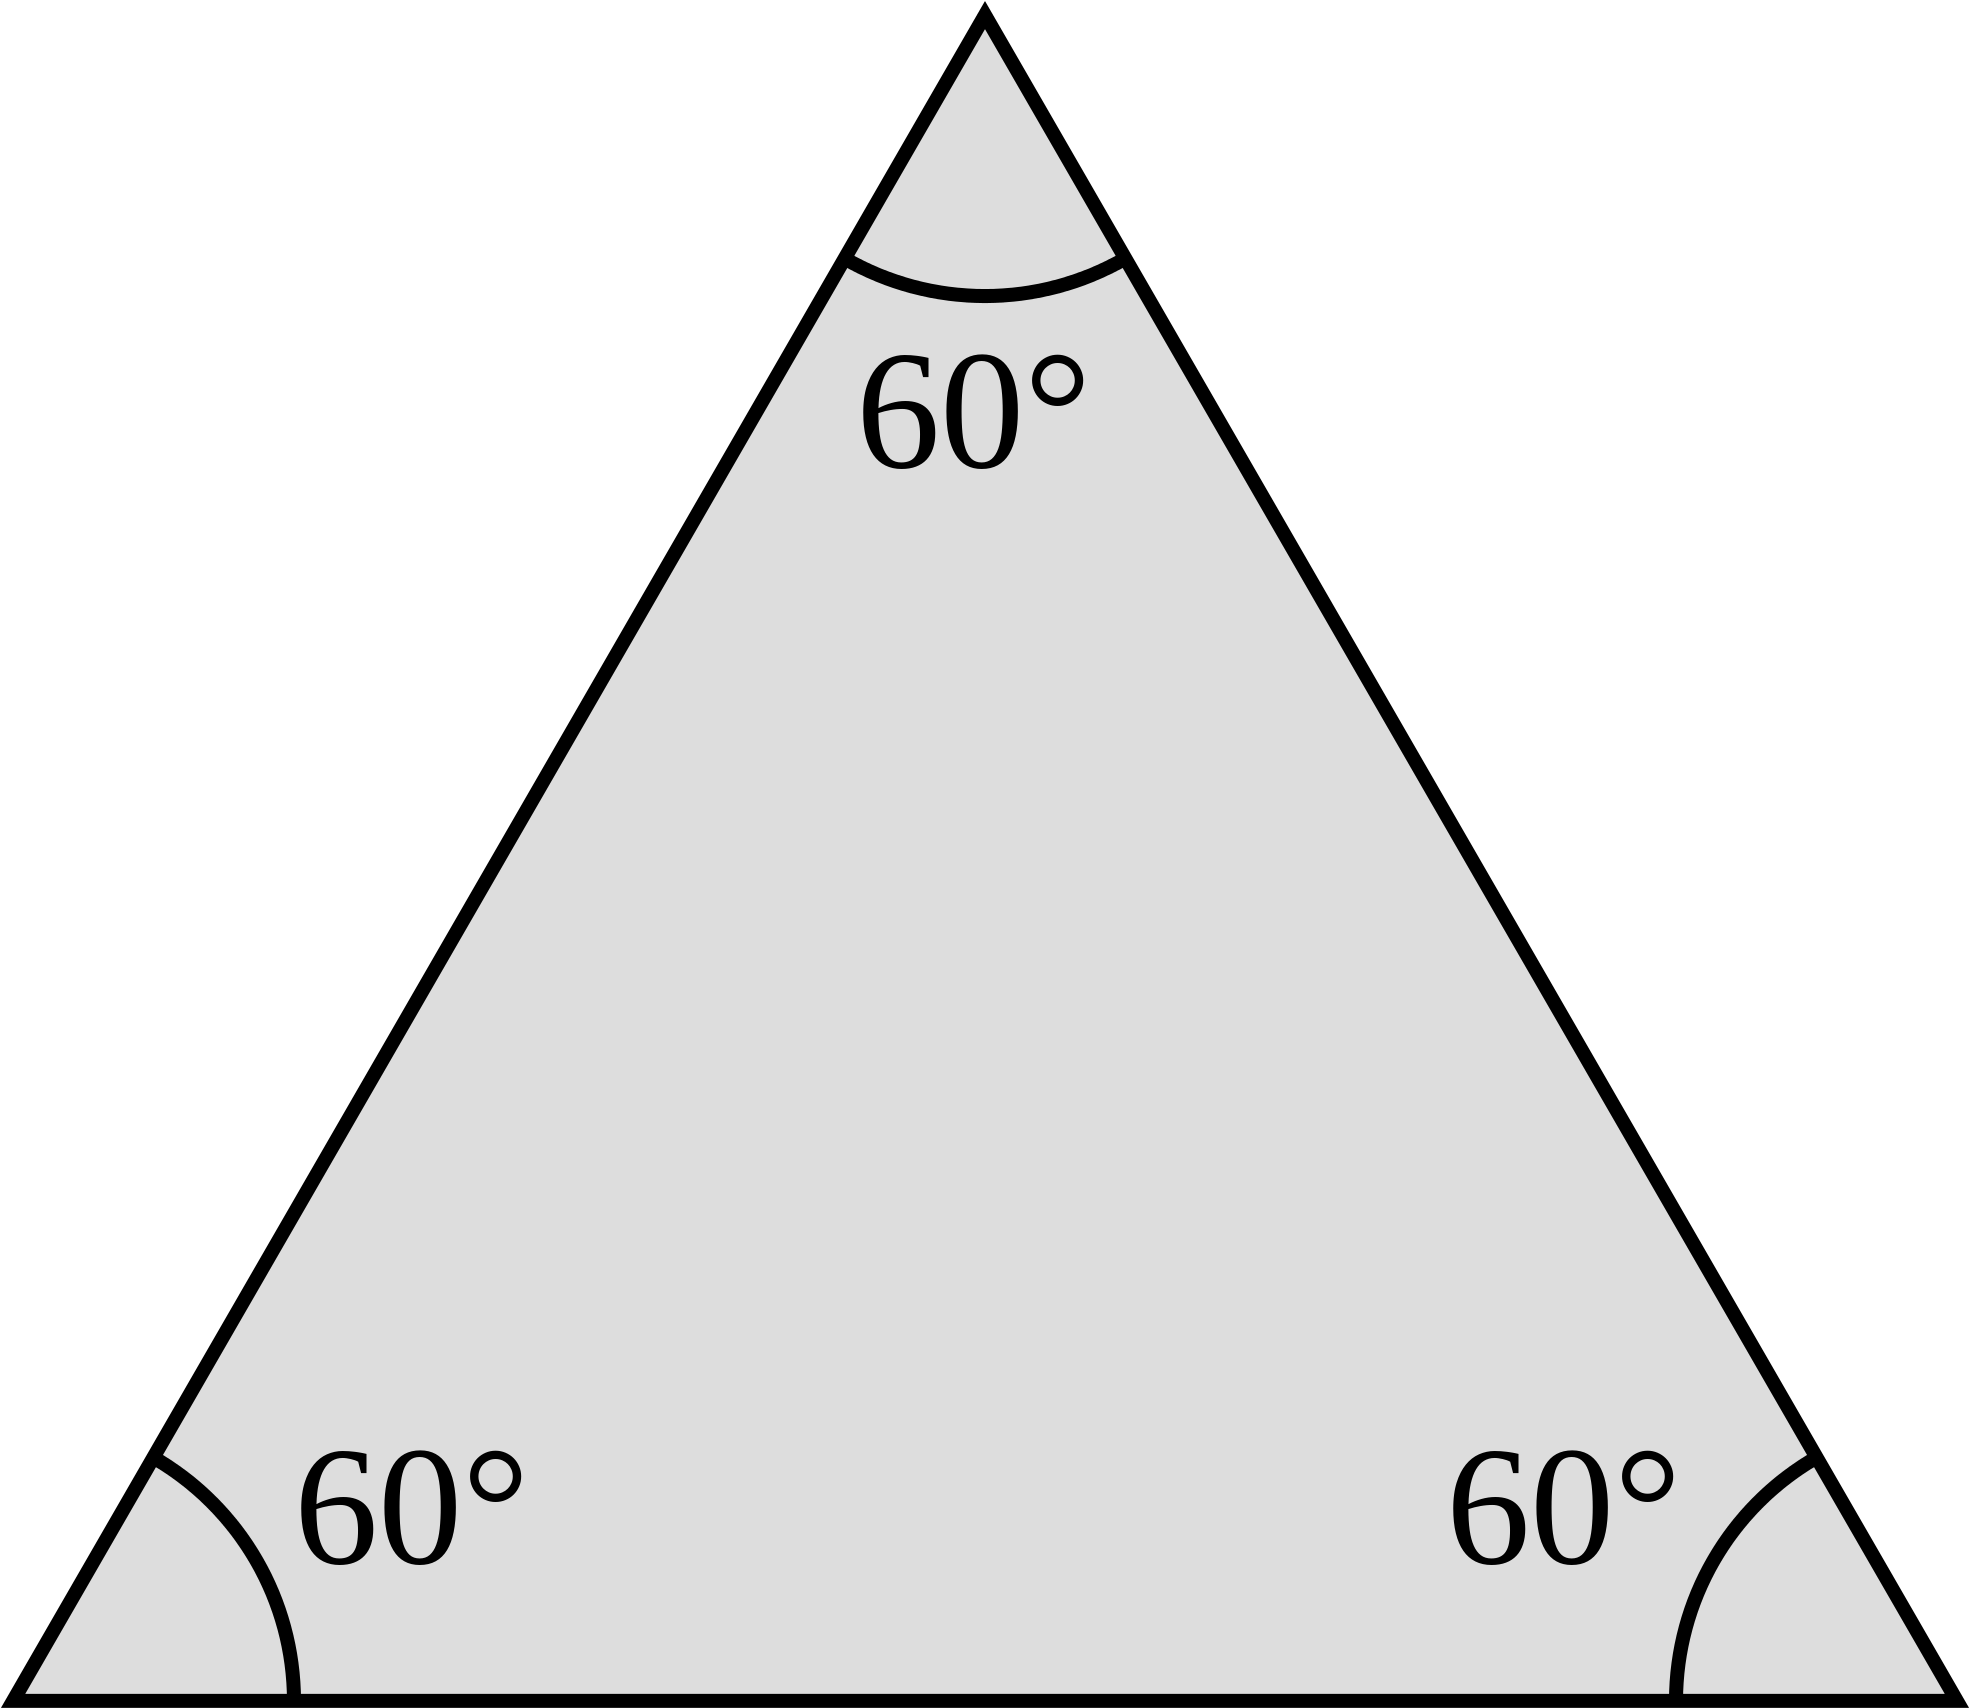 A Triangle With Numbers And A Black Background